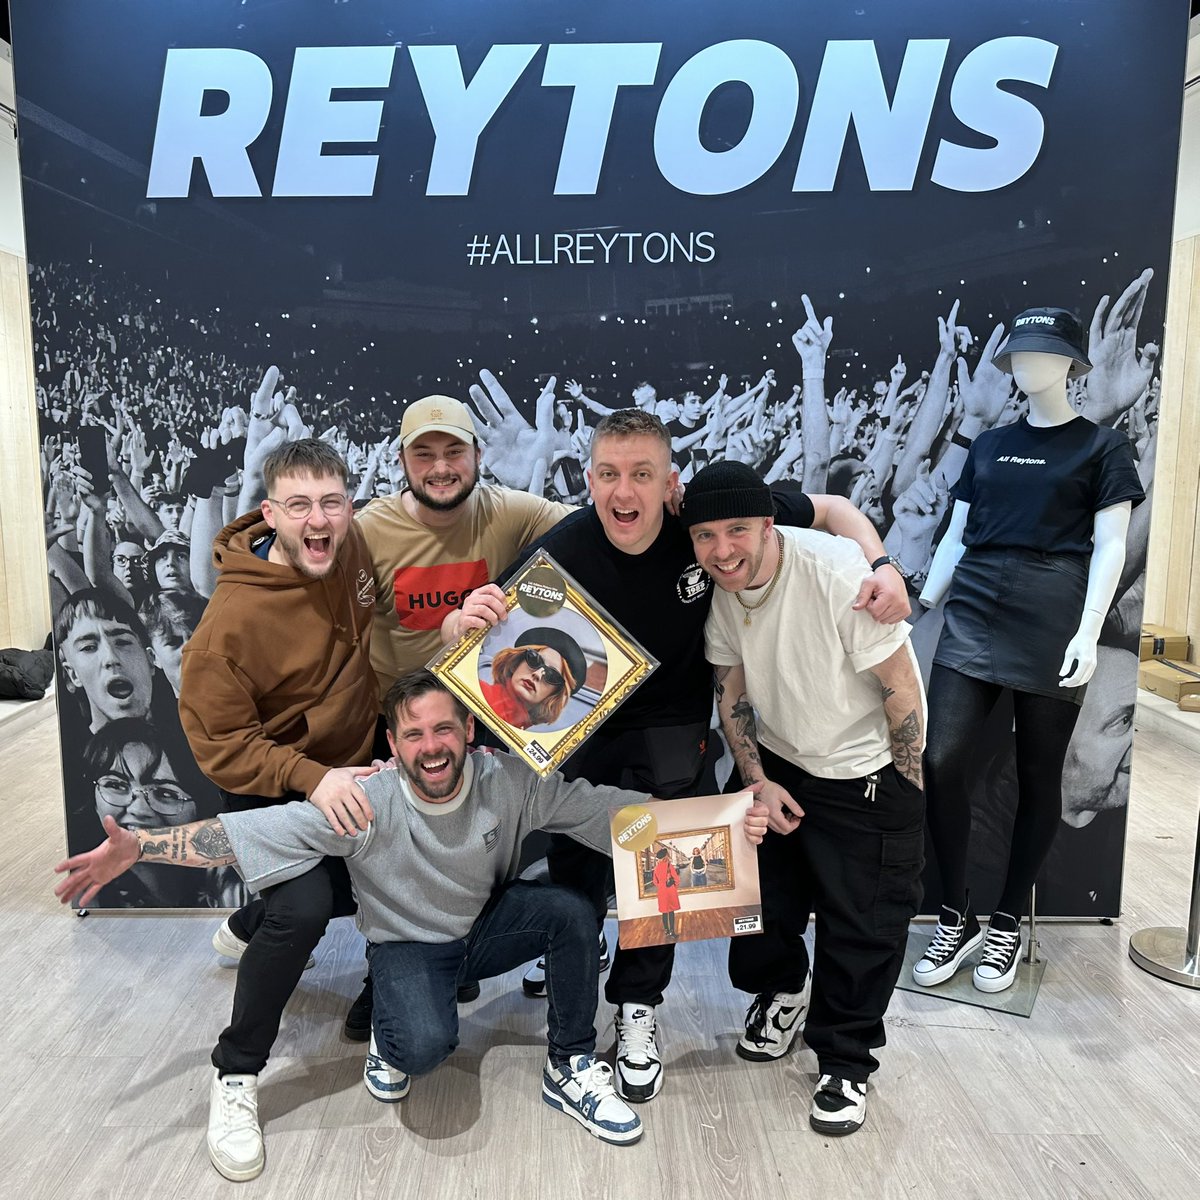 ALBUM OUT AT MIDNIGHT!!! Our third album is out everywhere tomorrow!! Who’s ready to do it all over again… Let us know if you’re staying up to ring it in with us!! #AllReytons